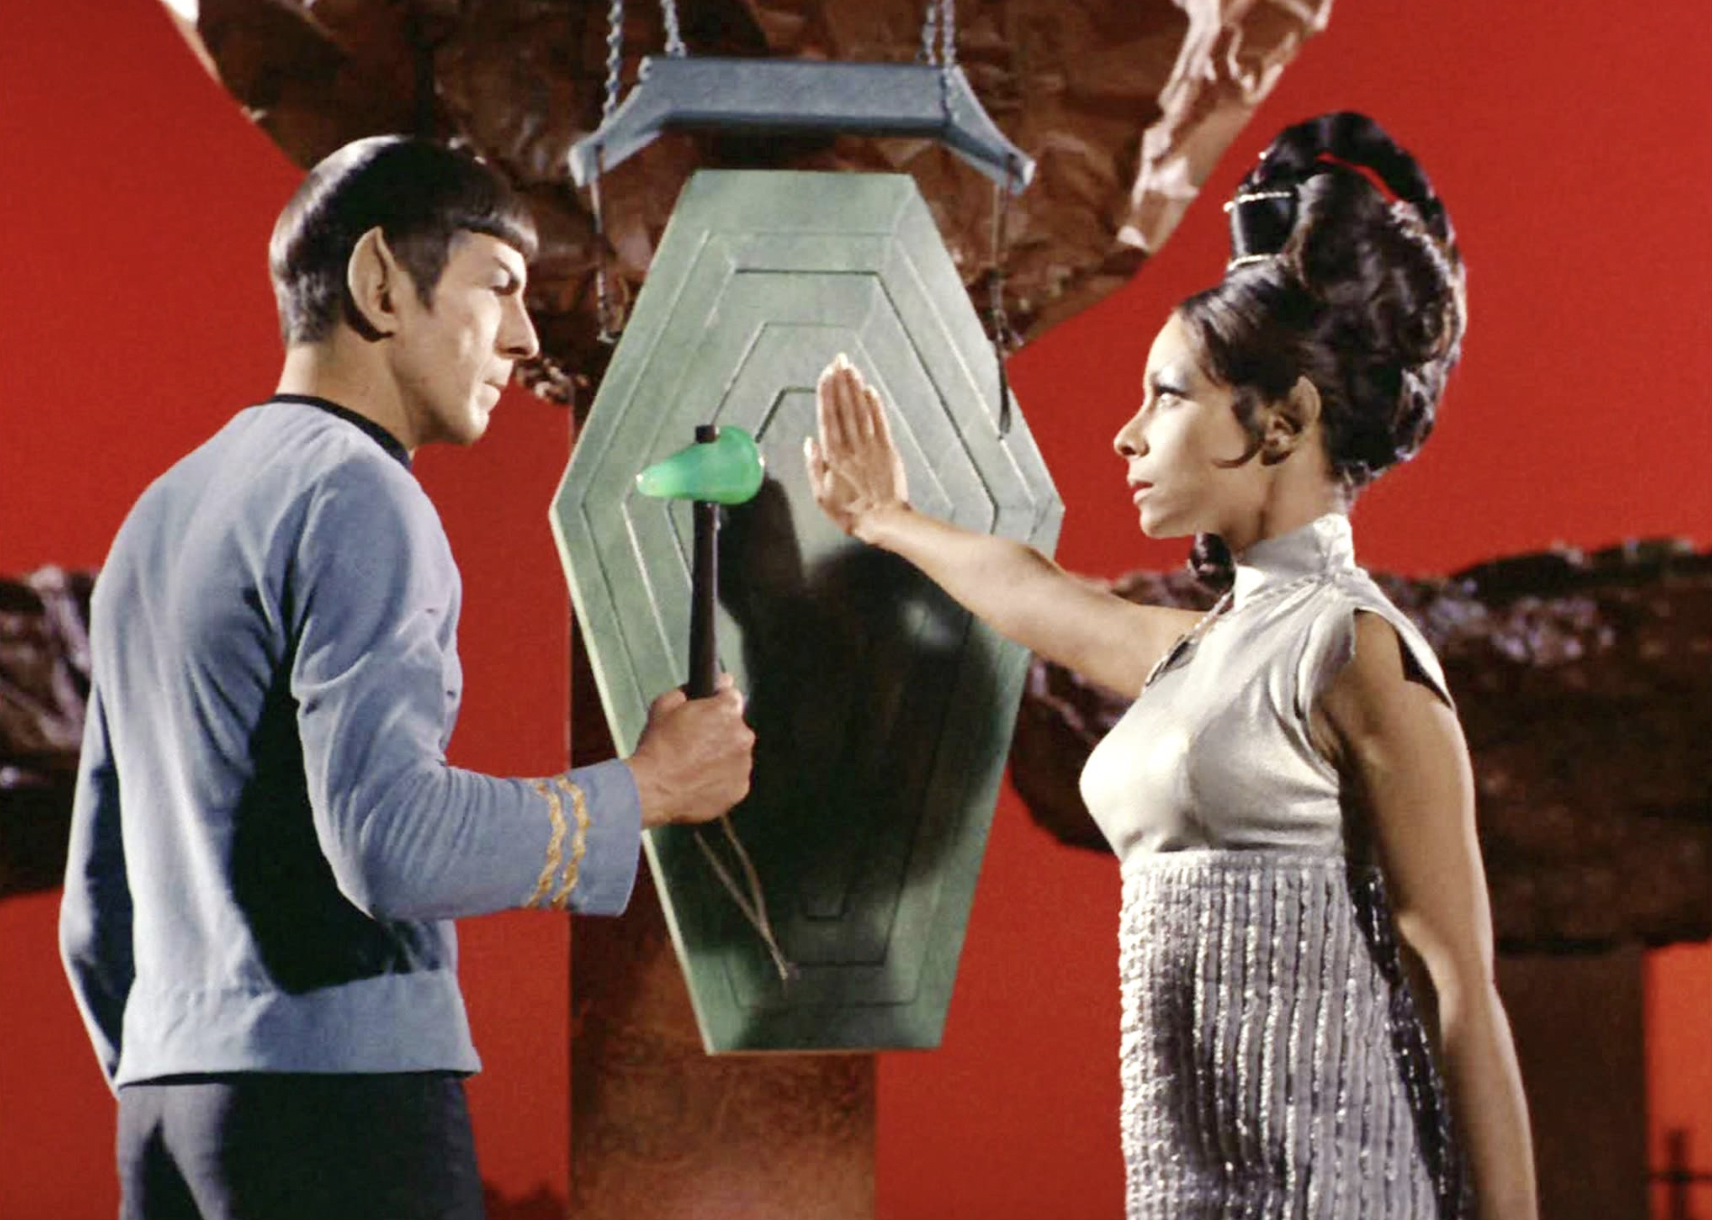 <p>- IMDb user rating: 8.6<br> - Season 2, Episode 1<br> - Director: Joseph Pevney</p>  <p>The season premiere of "Star Trek" Season Two introduced concepts that would permeate larger popular culture. Spock's bizarre behavior leads the characters to learn about pon farr, a physiological phenomenon related to Vulcan mating. Viewers meet Spock's betrothed, a Vulcan named T'Pring, and the iconic Vulcan salute is used for the first time in this episode. The events culminate in a fight between Kirk and Spock, with the scene and <a href="https://www.youtube.com/watch?v=guNfdqpk7bA">its incidental music</a> parodied in movies like "The Cable Guy" and <a href="https://whatculture.com/tv/every-star-trek-reference-in-futurama?page=4">shows including "Futurama."</a></p>